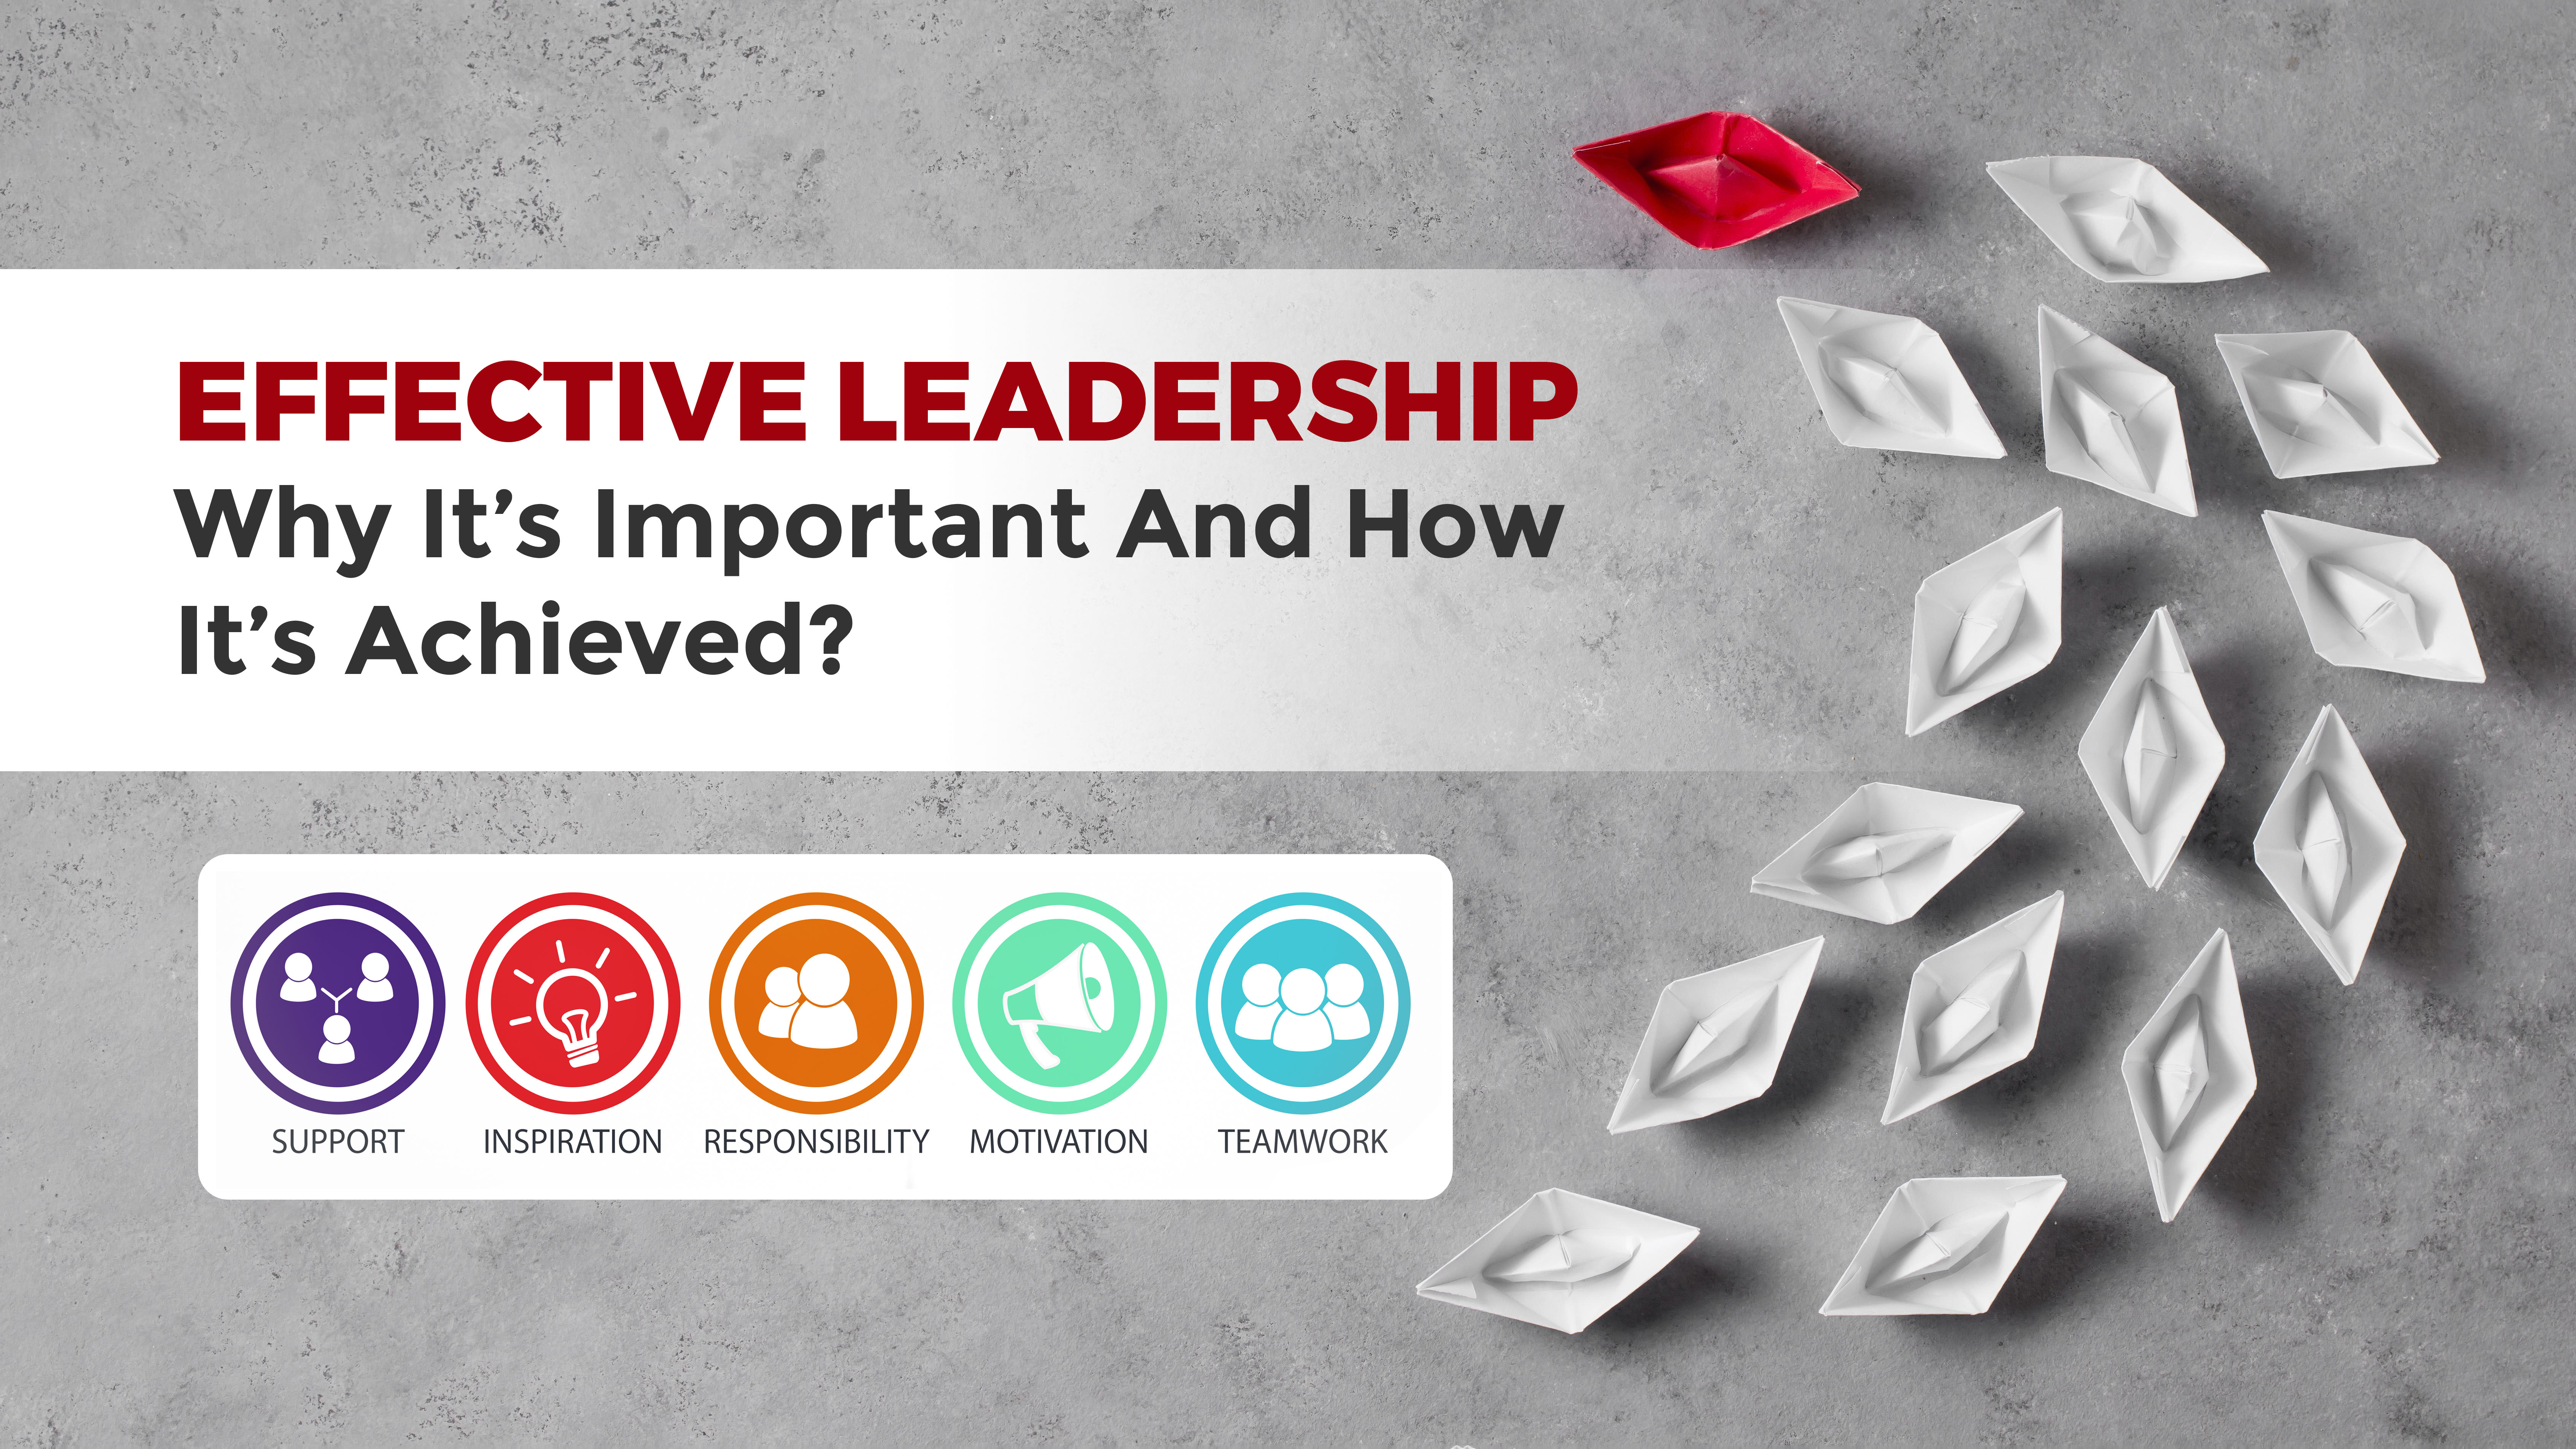 Effective Leadership: Why It's Important And How It's Achieved?